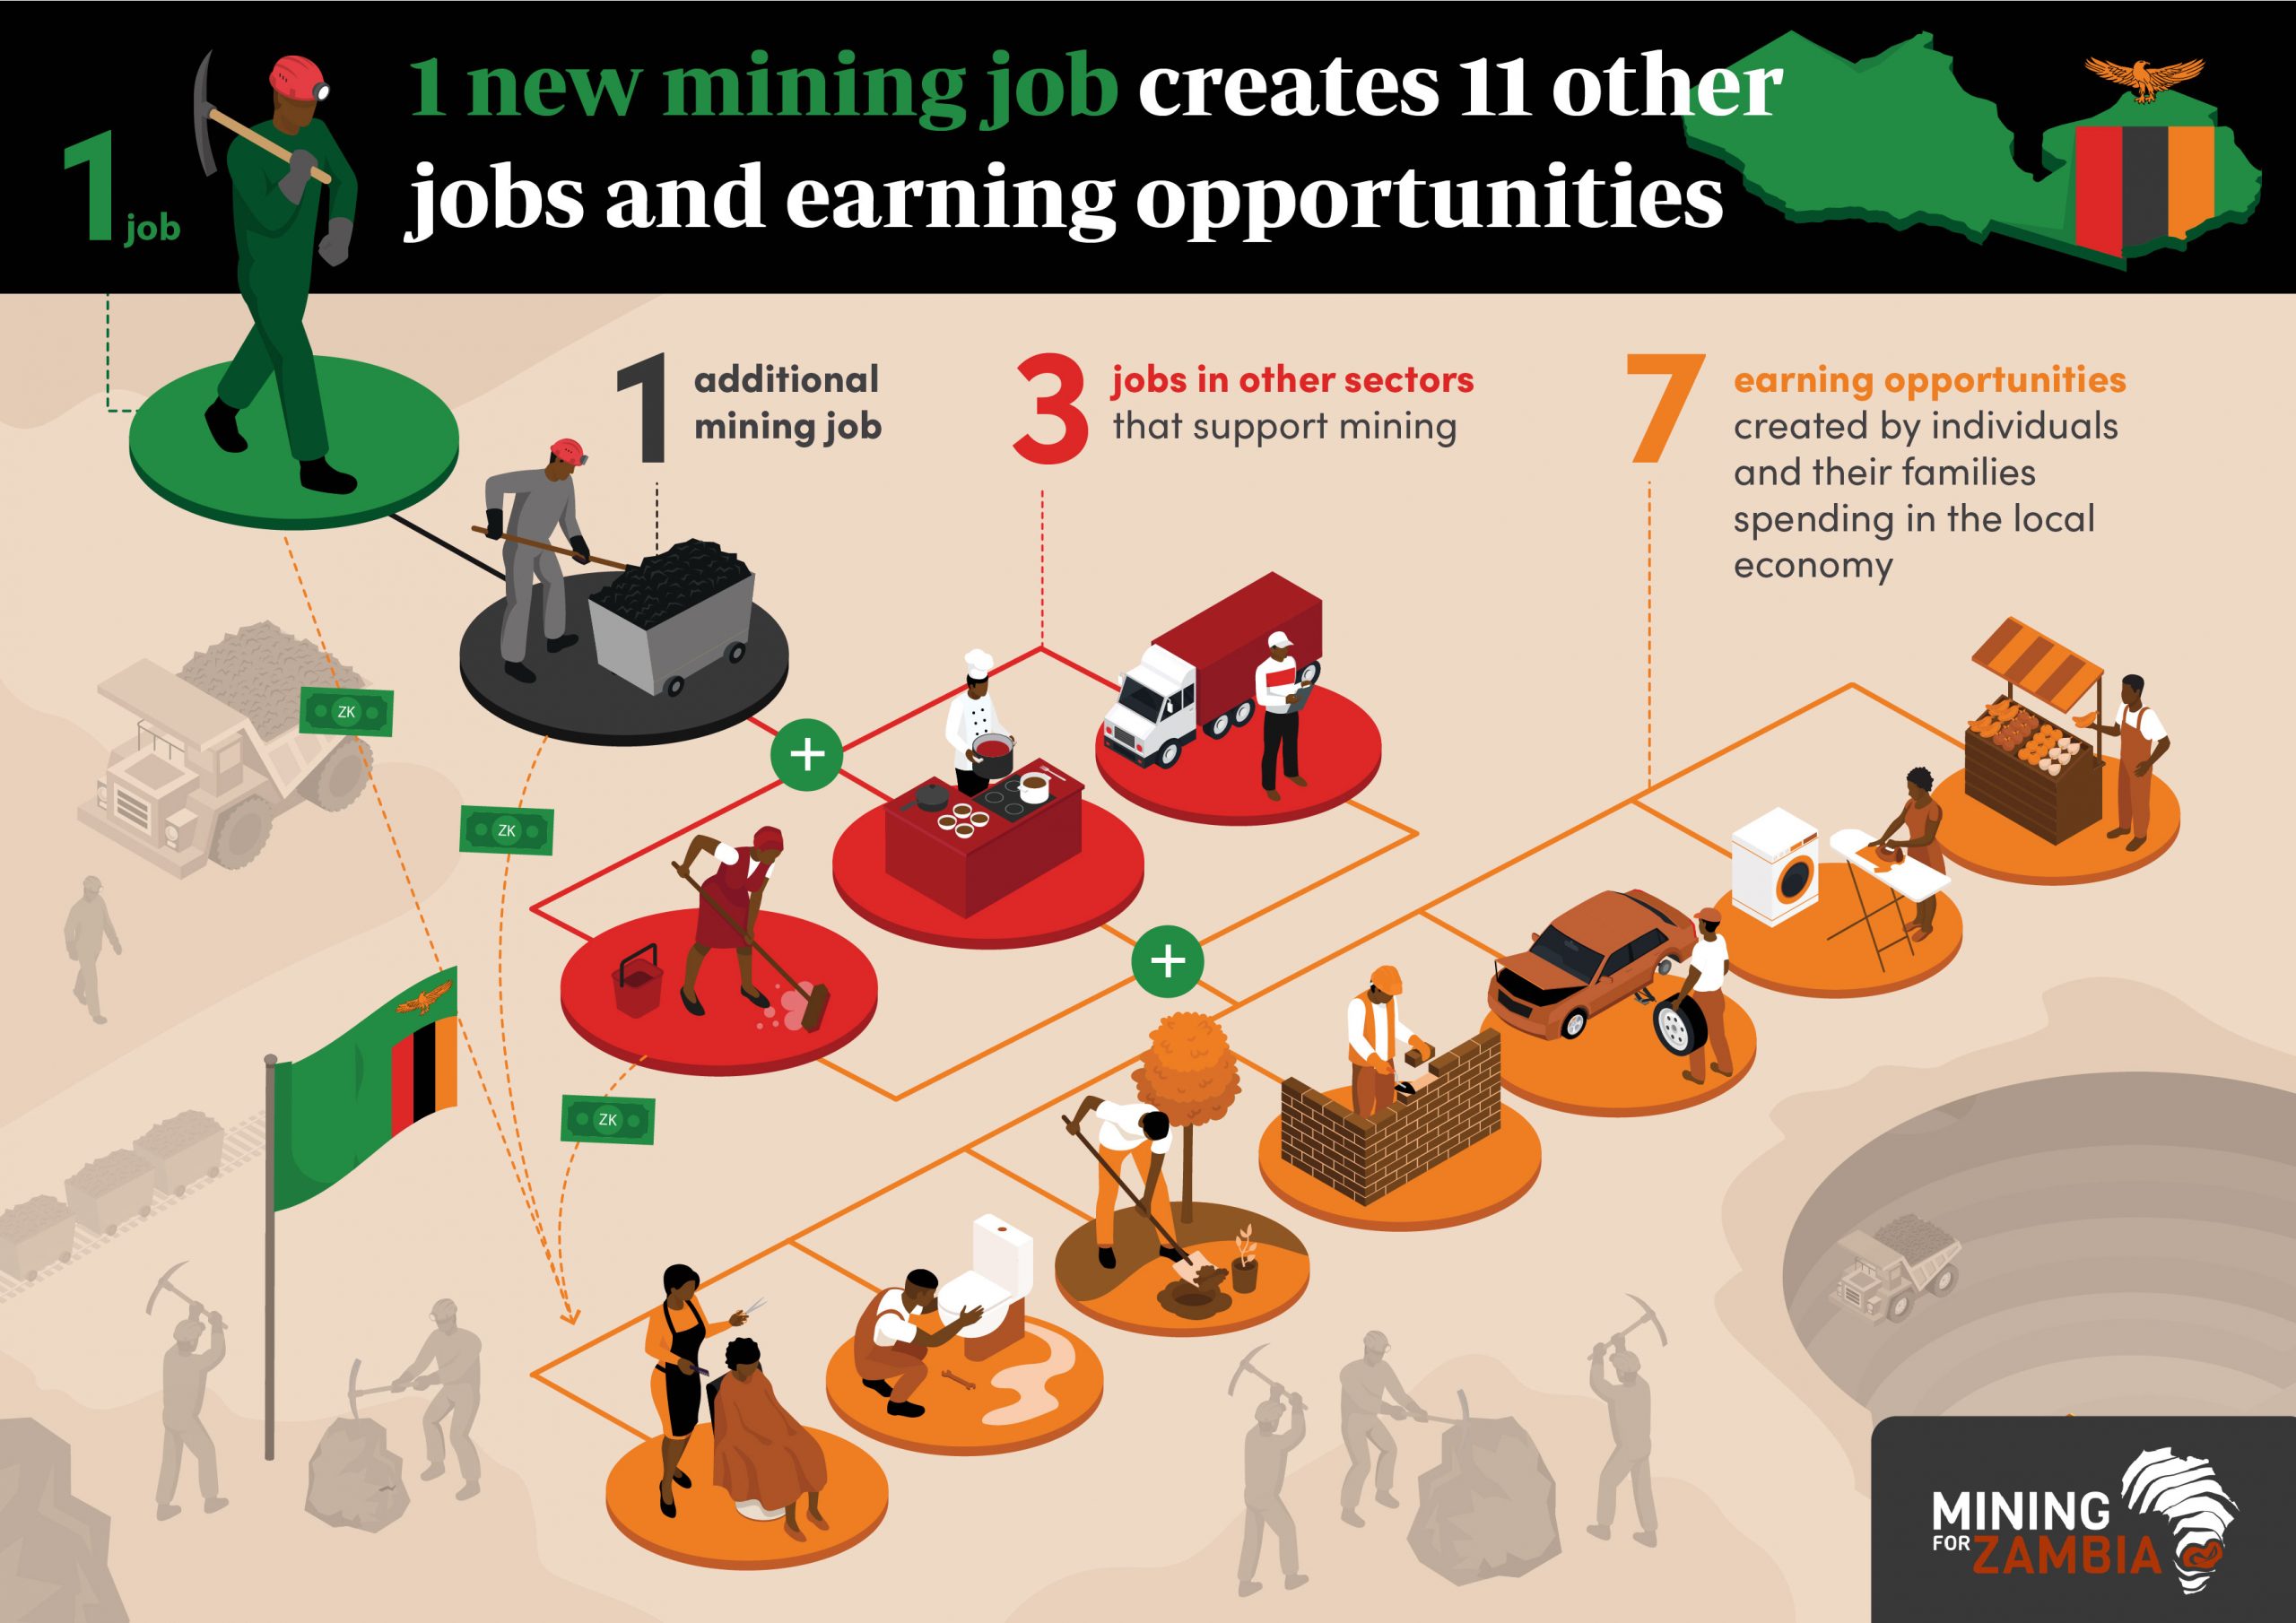 Mining_for_Zambia_Multiplier_Effect_Infographic_1 new mining job creates 11 other jobs and earning opportunities